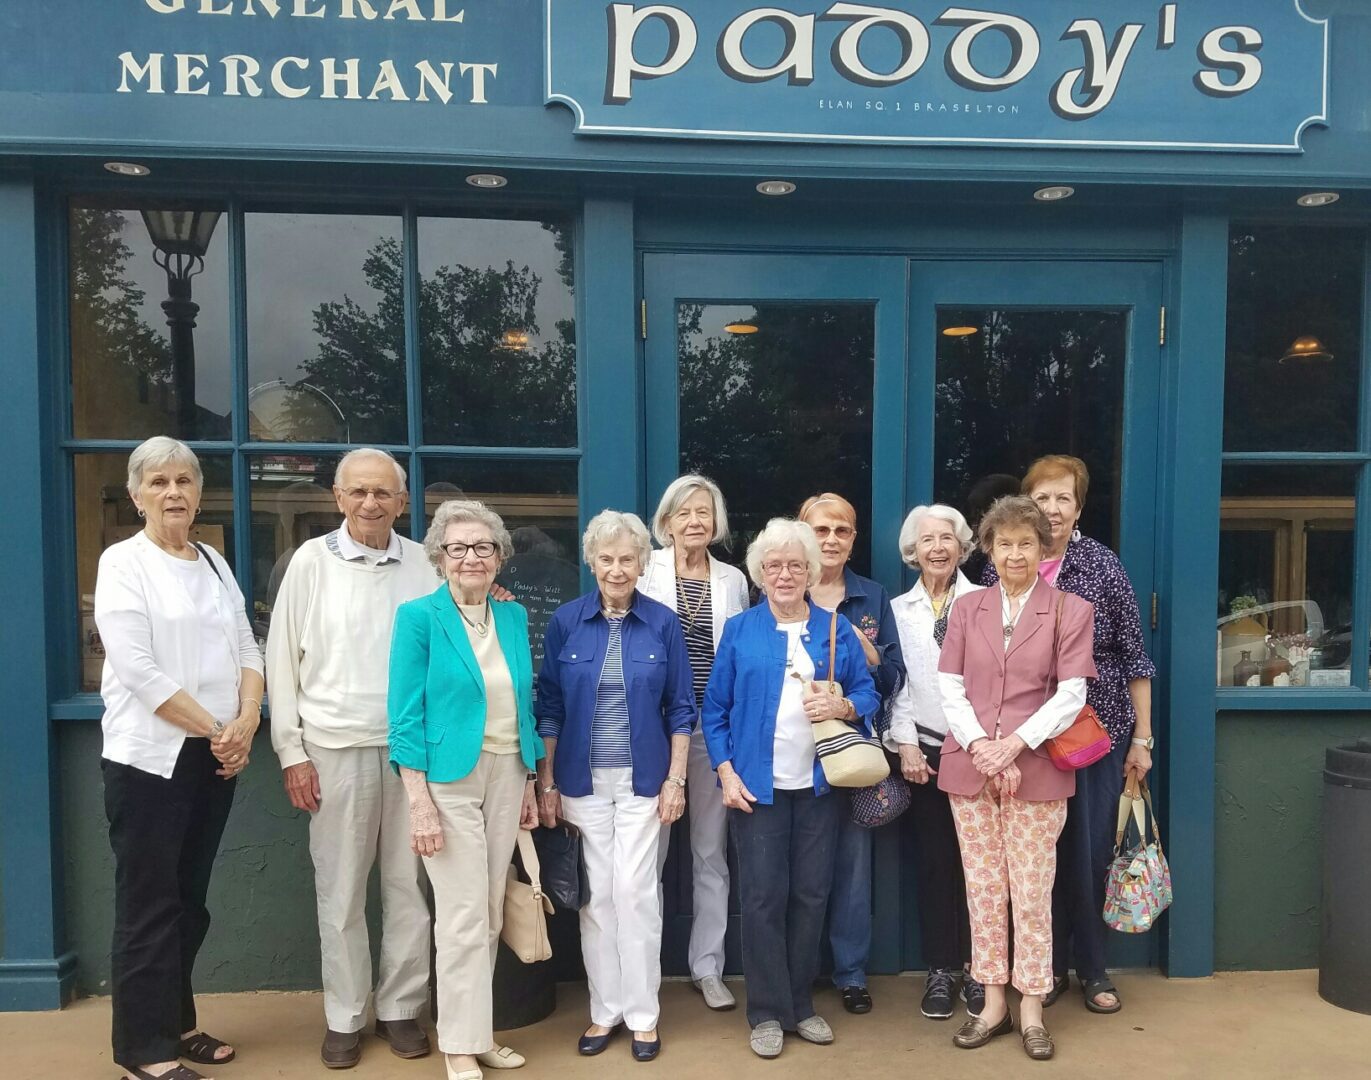 Ladies on staycation visiting Paddy's general merchant